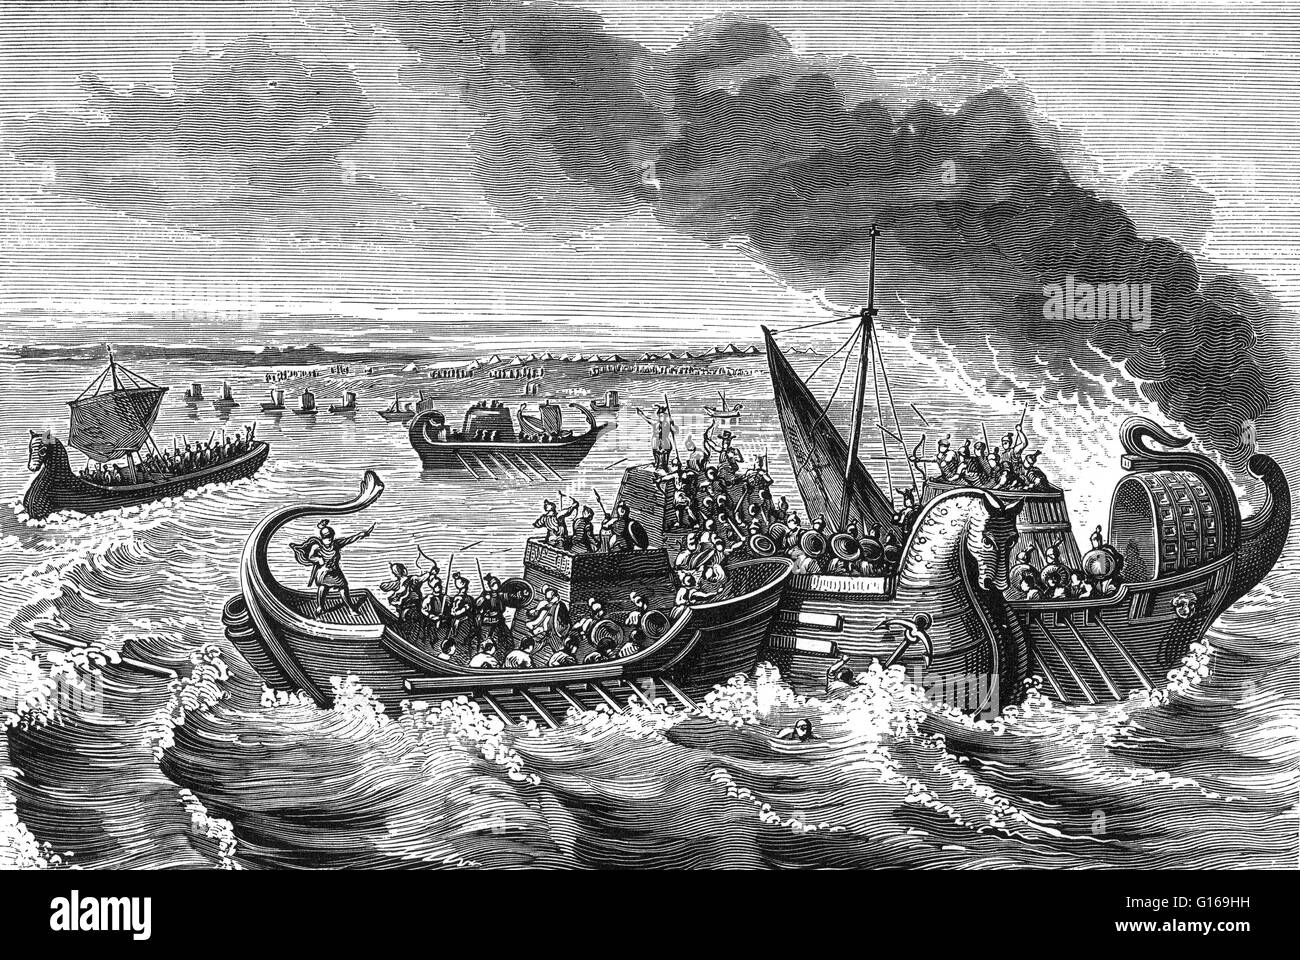 The Battle of Morbihan was a naval engagement between Roman and Veneti vessels on the Loire river, 56 BC. The Veneti were a seafaring Gallic people who lived in the Brittany peninsula (France), which in Roman times formed part of an area called Armorica. Stock Photo